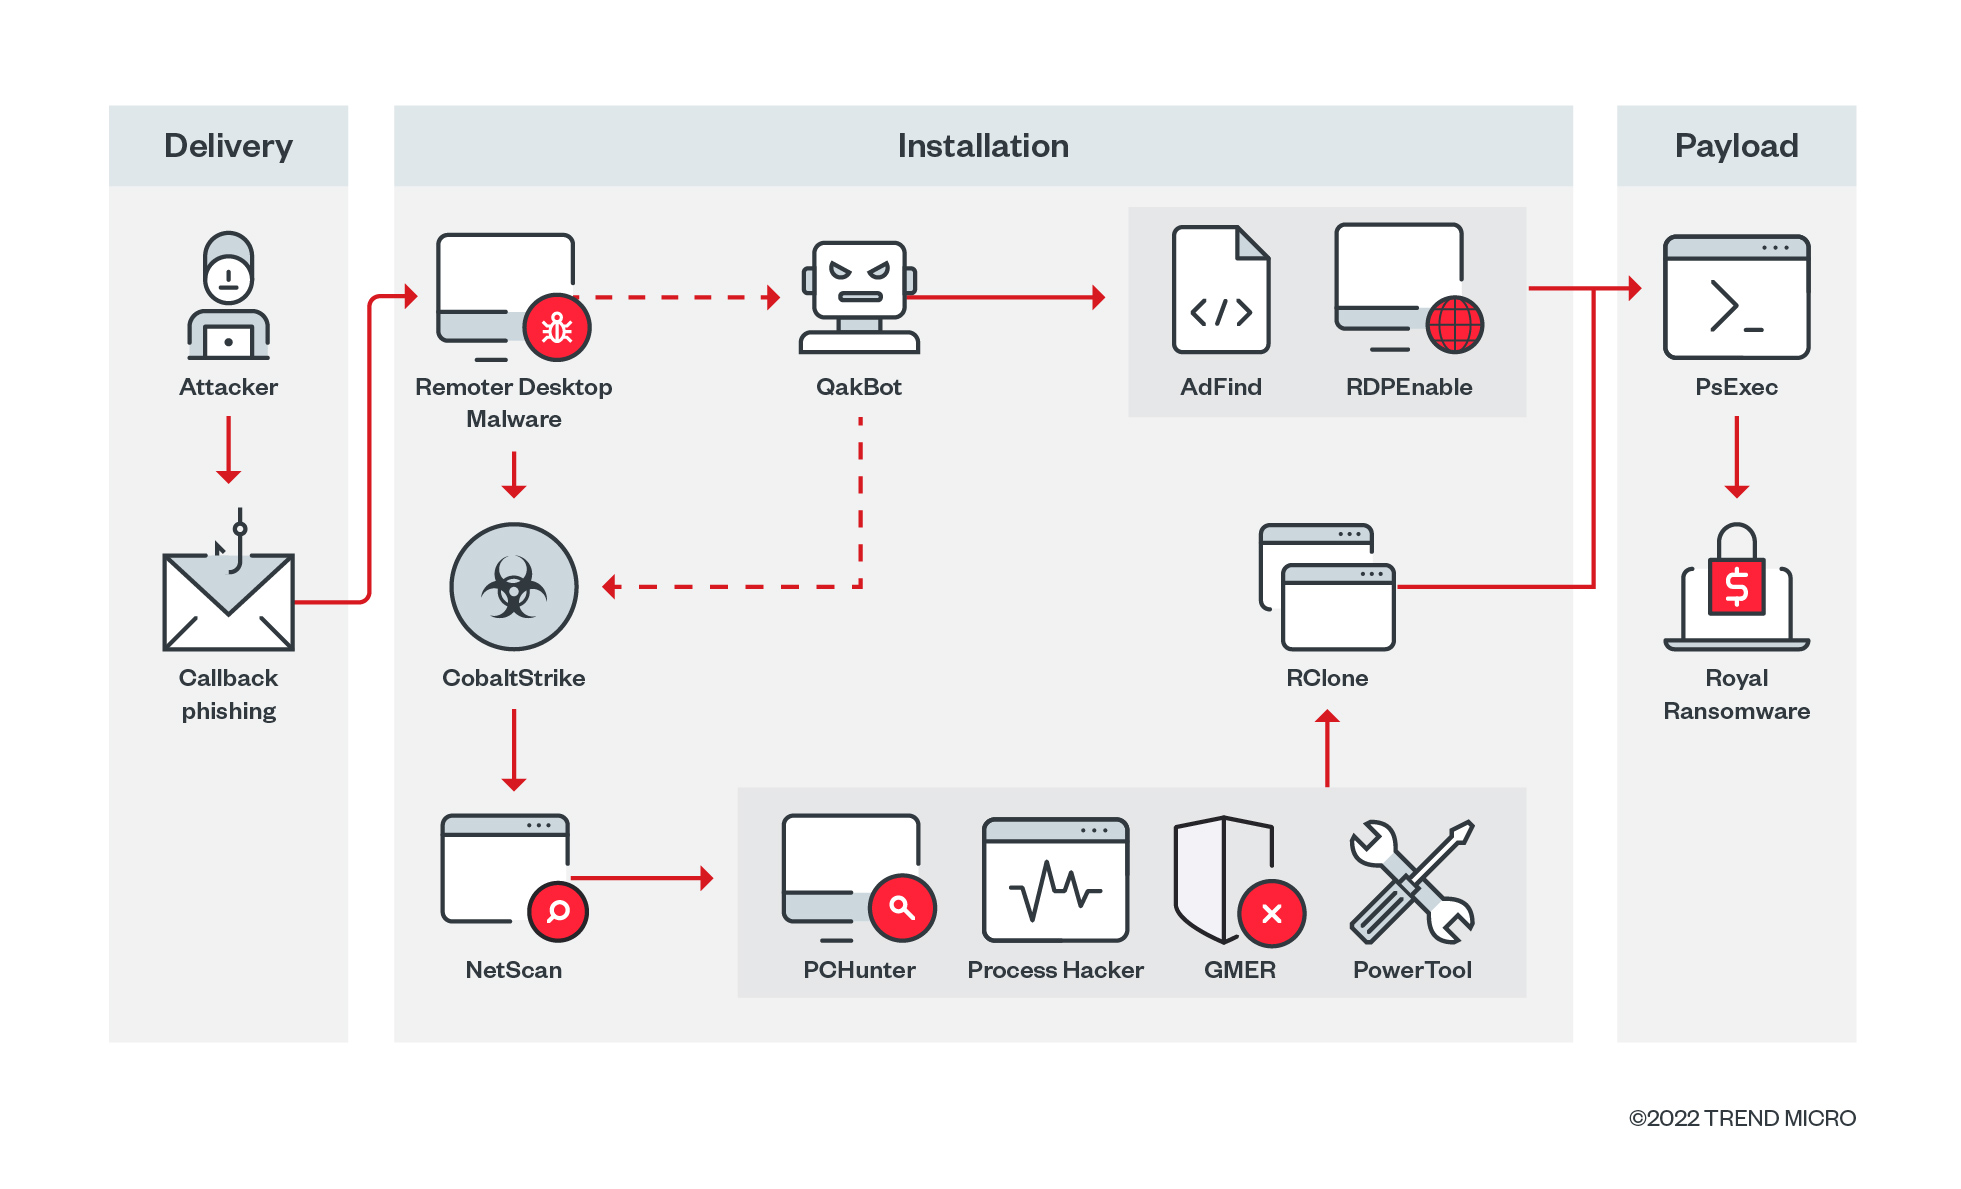 Figure 2. Royal ransomware’s attack flow